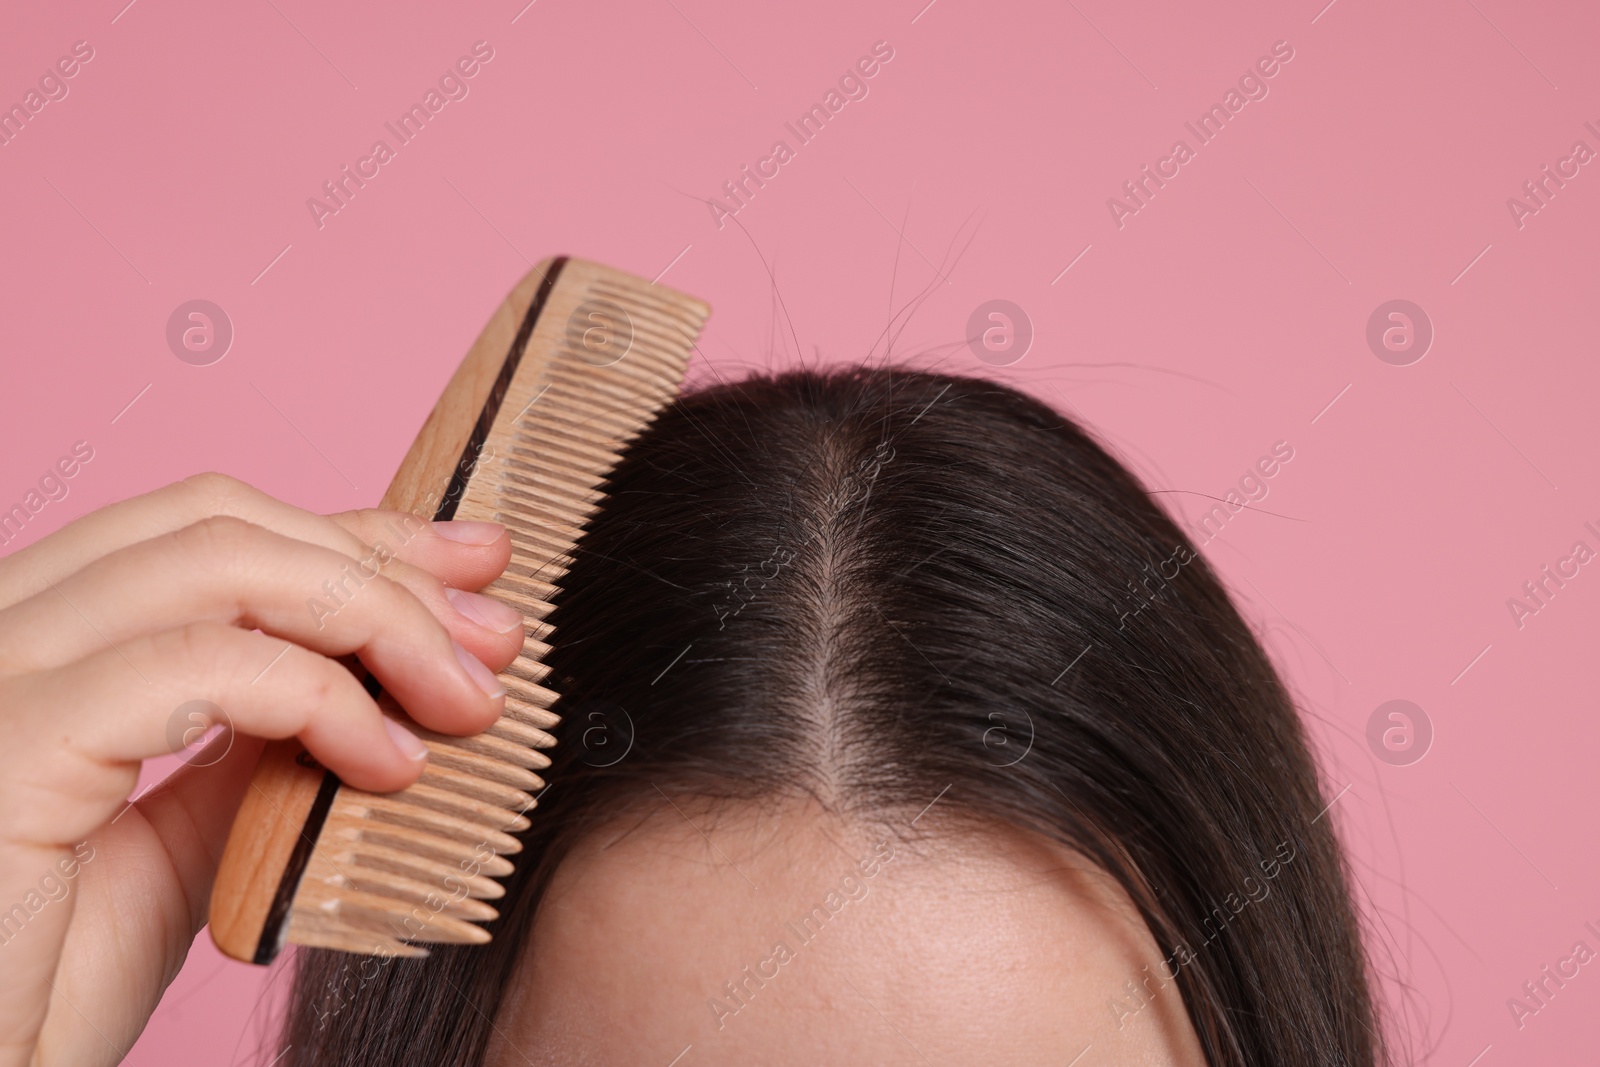 Photo of Woman with comb examining her hair and scalp on pink background, closeup